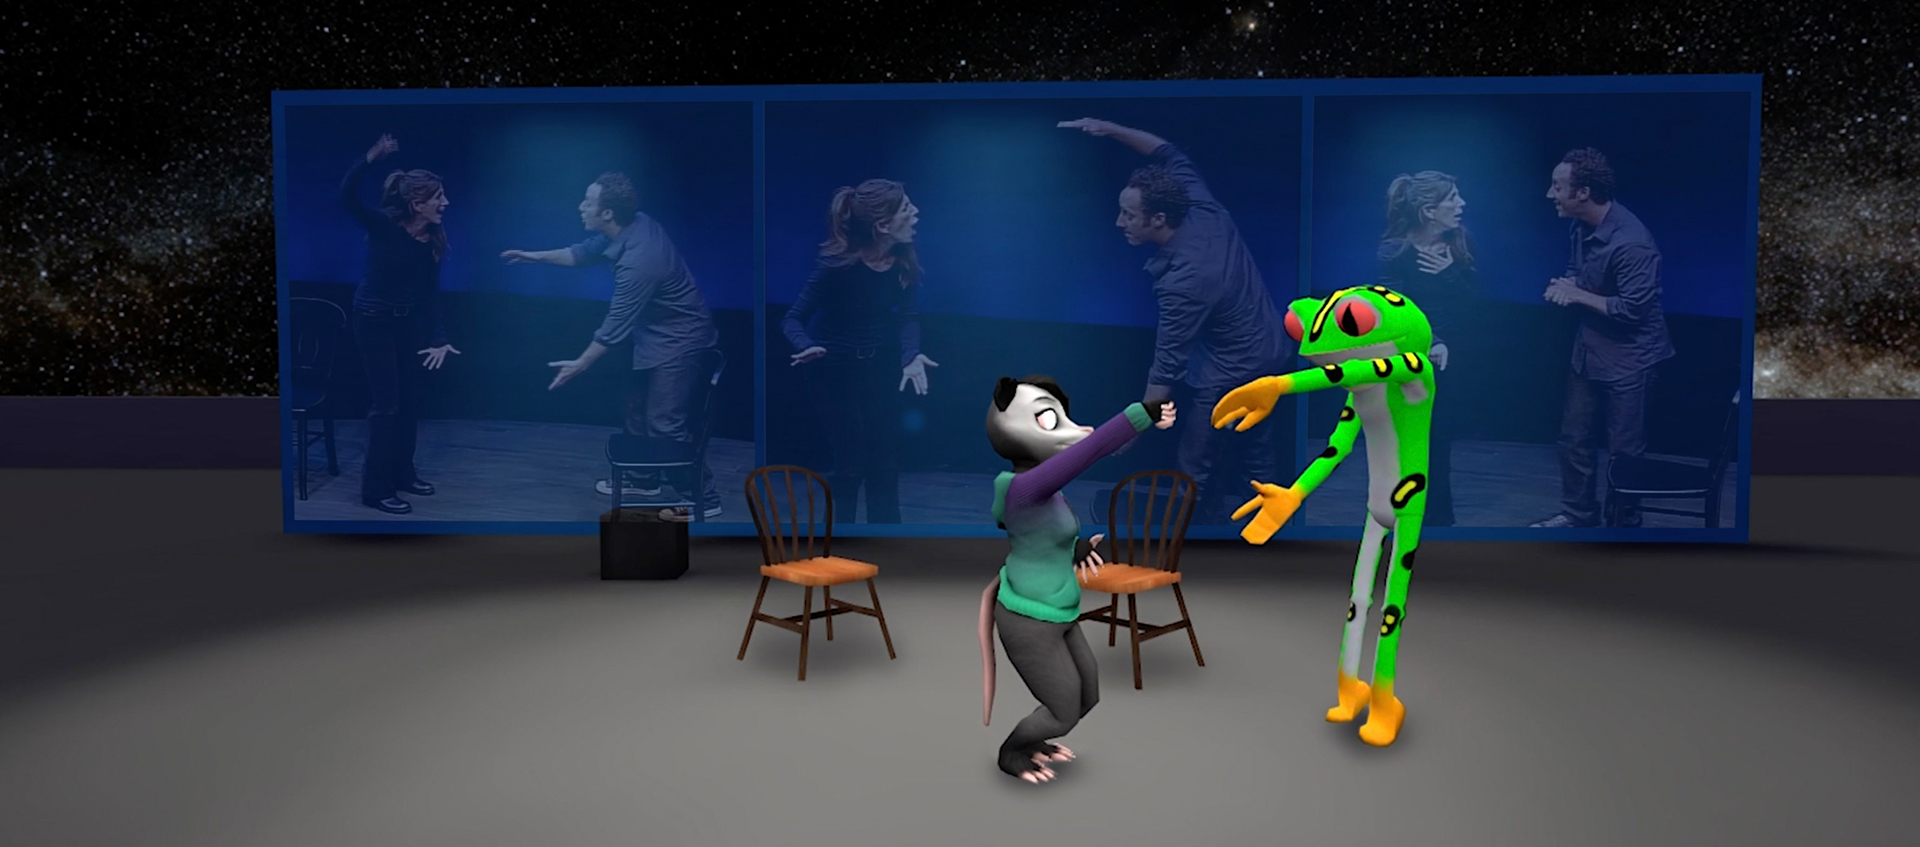 A computer animated rodent in sweatshirt seems to dance with a glove-wearing spotted frog in a virtual environment with two chairs and a background screen with three photos of real actors making similar gestures